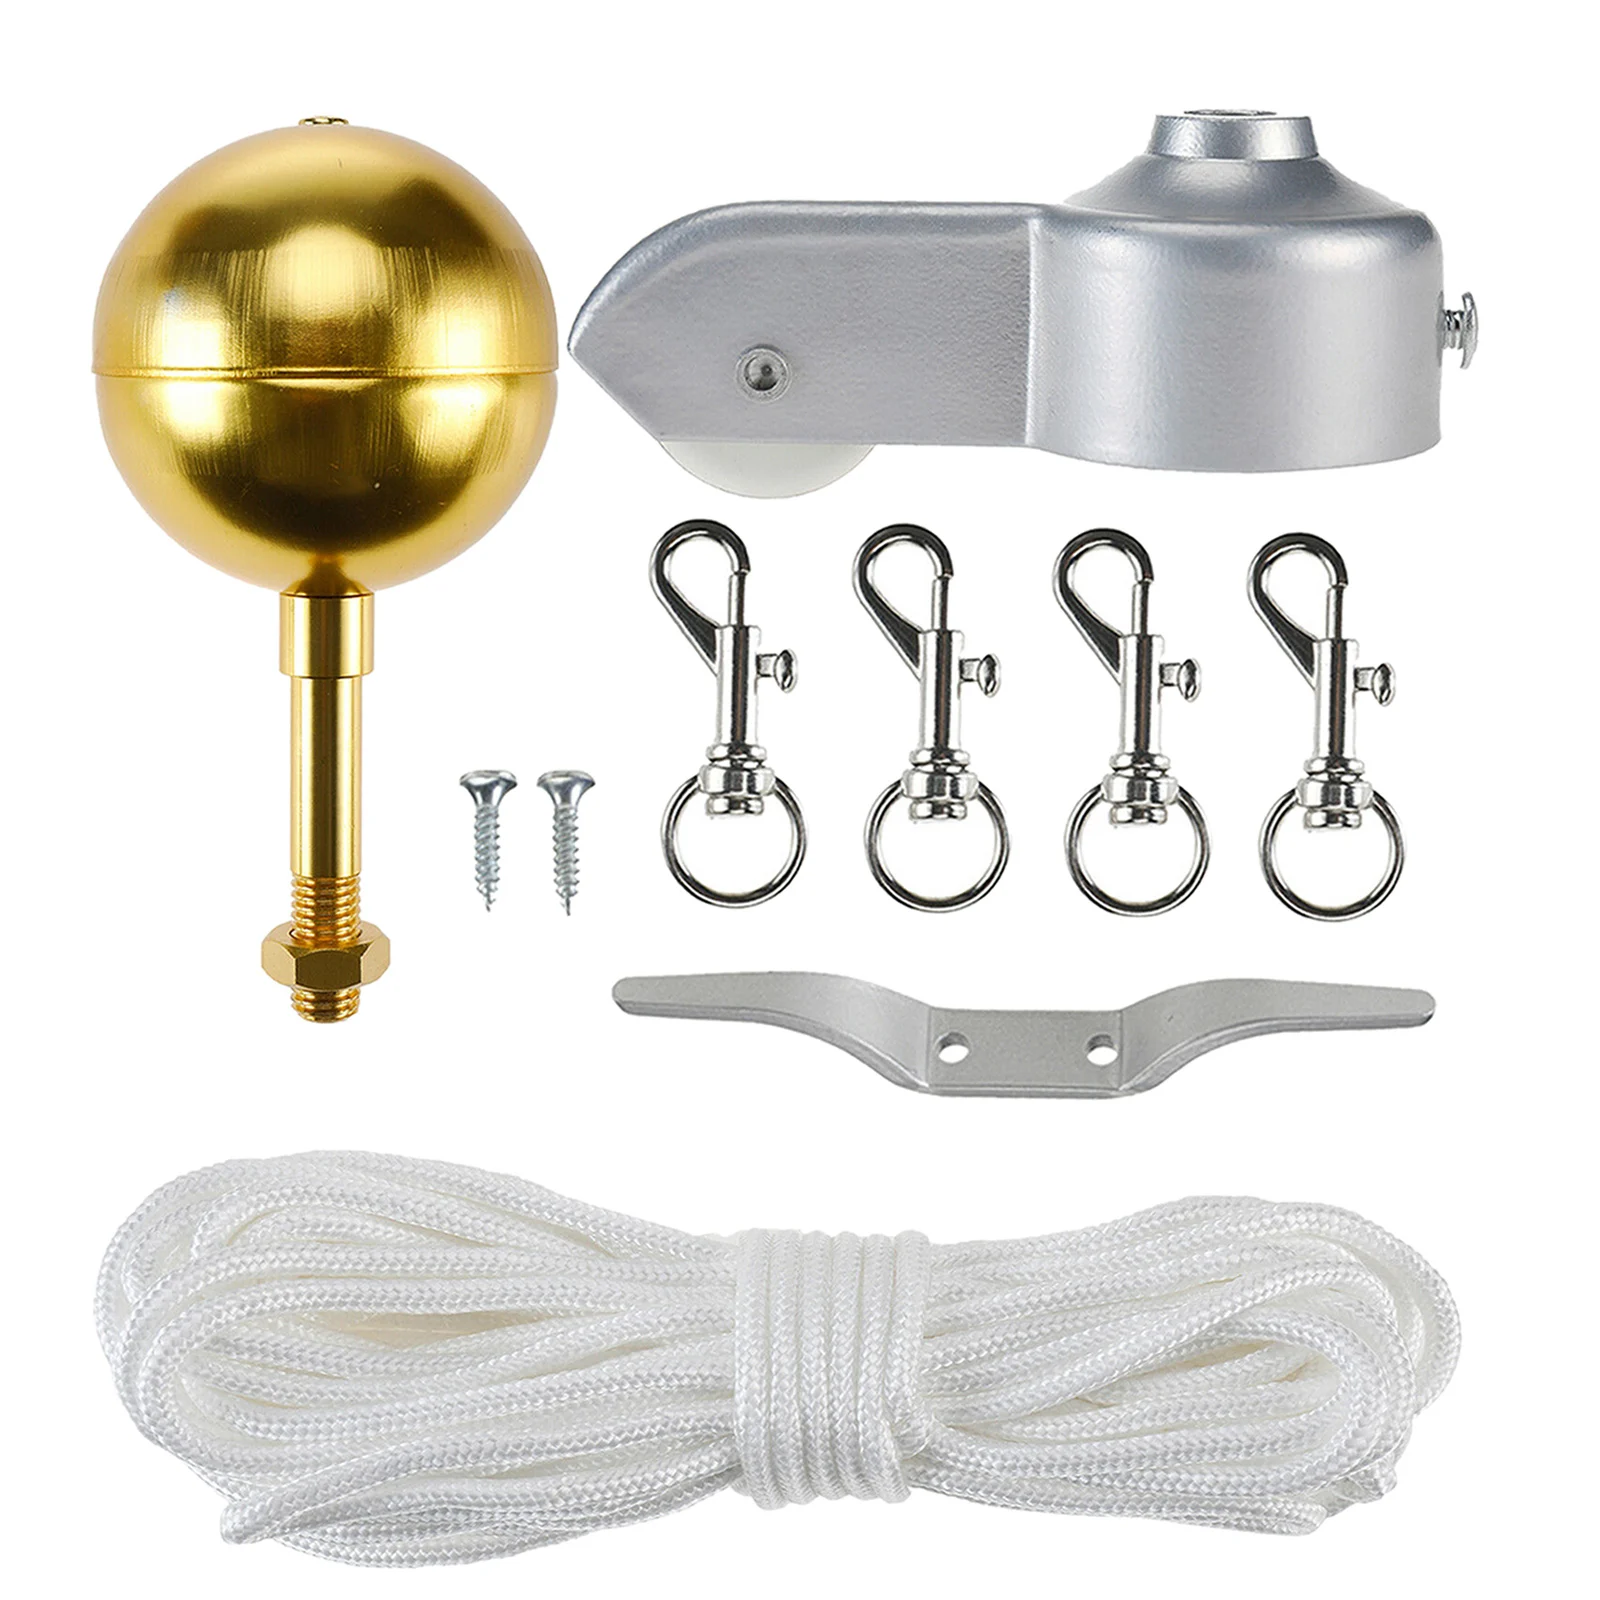 1pc Flagpole Hardware Repair Kit 50 Ft Halyard Rope 4 Flagpole Swivel Snap Clips Flagpole Truck for 2